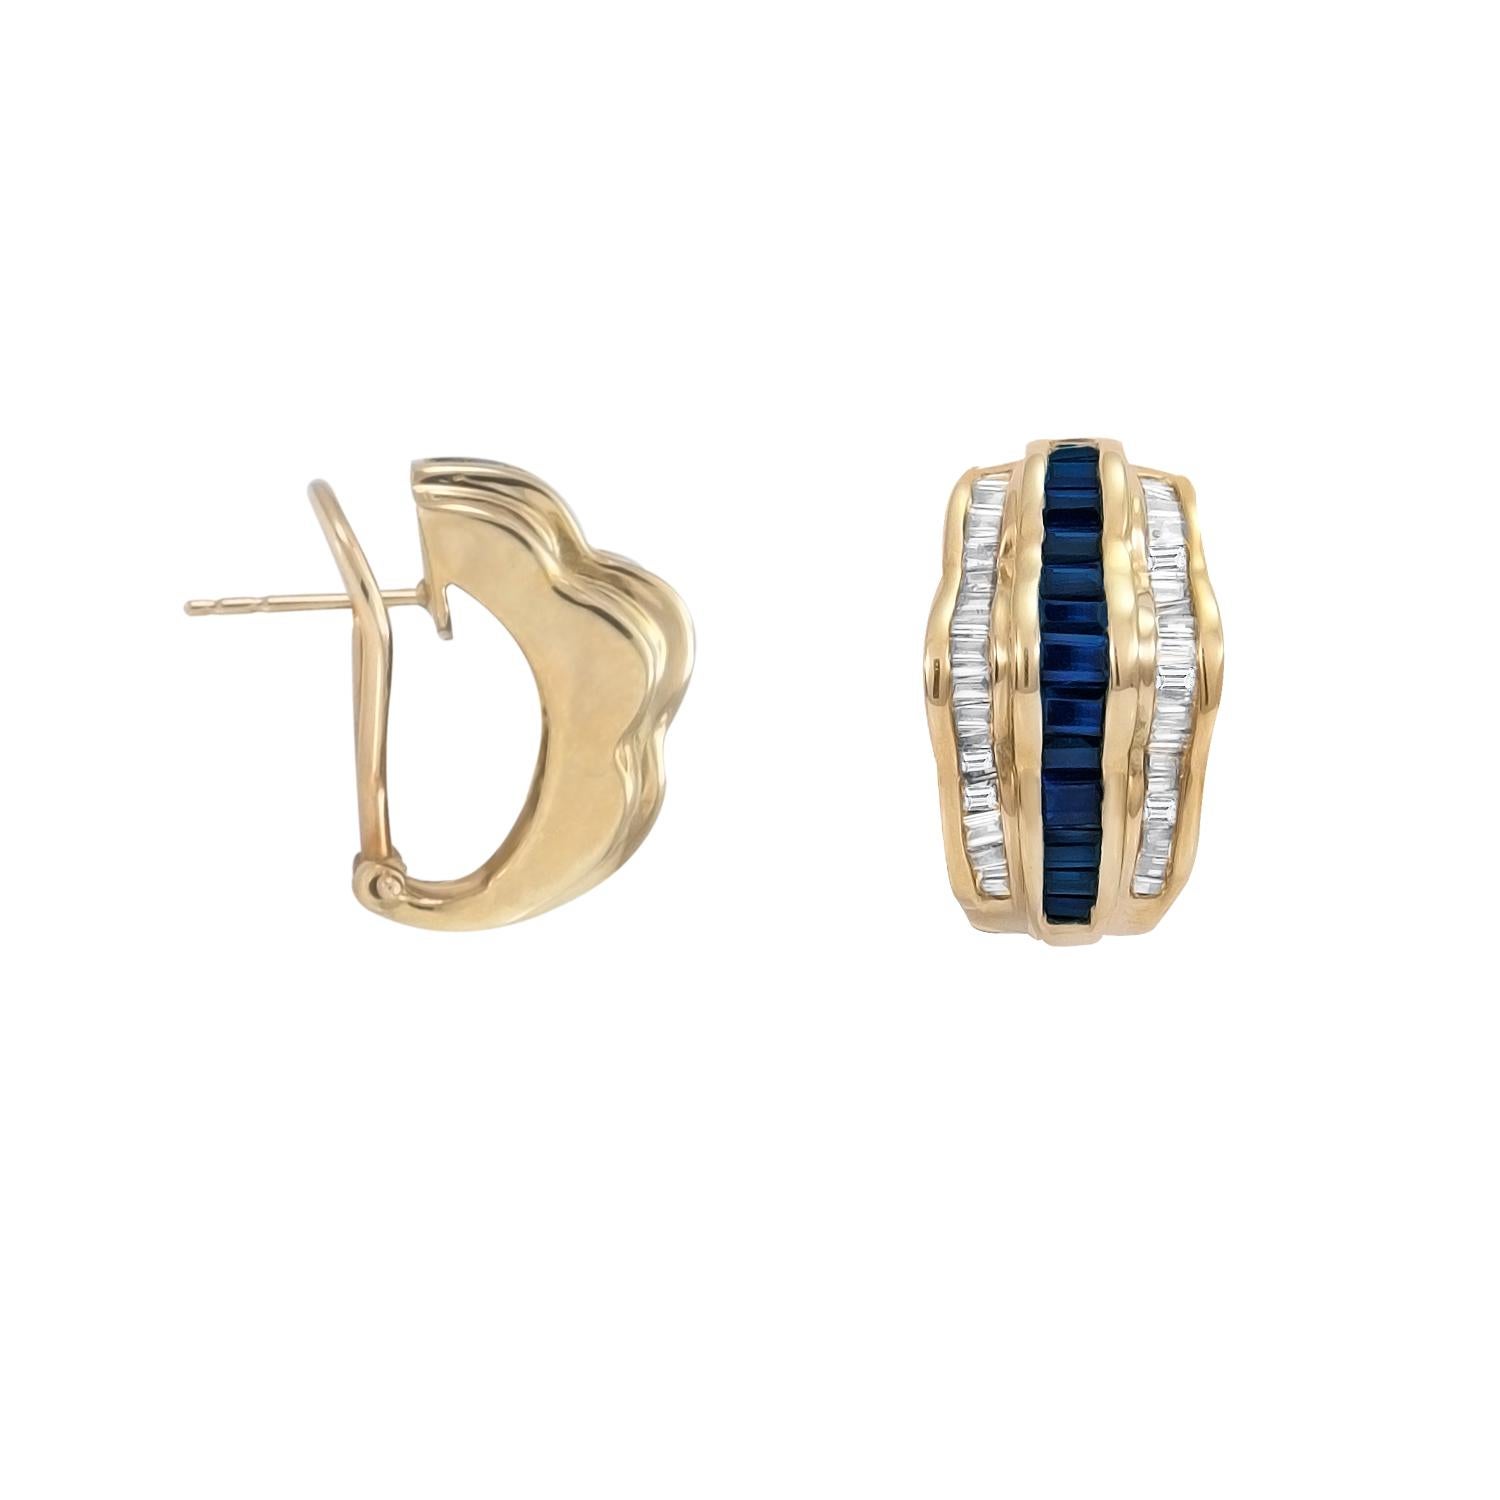 Beautiful wavy diamond and sapphire art deco earrings designed by Orostar. These charming women's earrings are available in stock.
* Metal: 14 Karat Yellow Gold
* Gold Weight: 7.6 grams
* Diamond Weight: 1.65 Carats
* Diamond Color Grade:  I
*